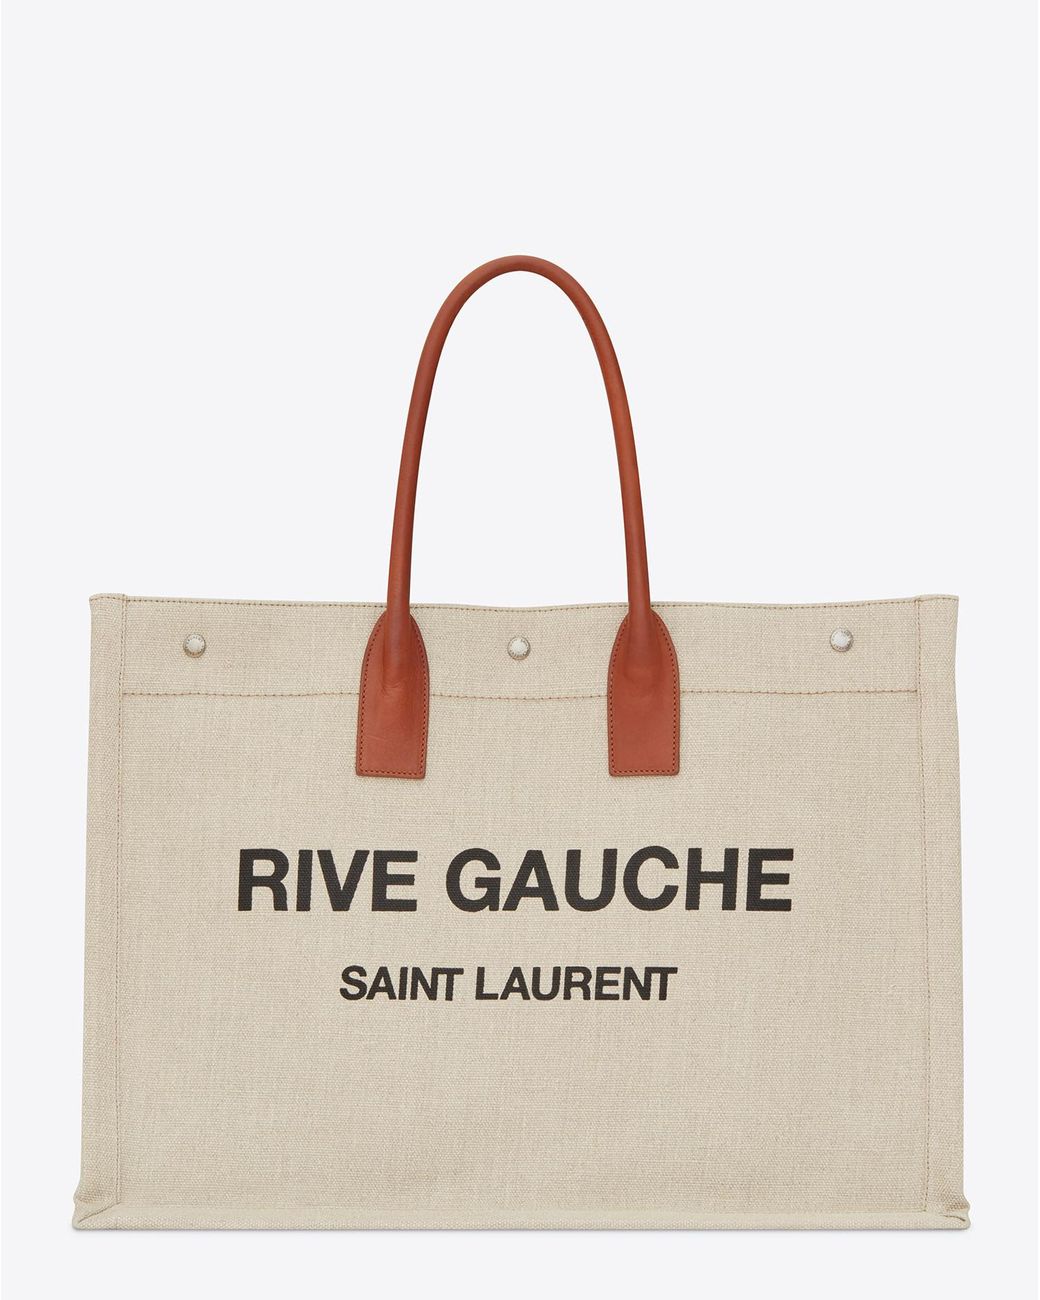 RIVE GAUCHE SMALL TOTE BAG IN LINEN AND LEATHER, Saint Laurent